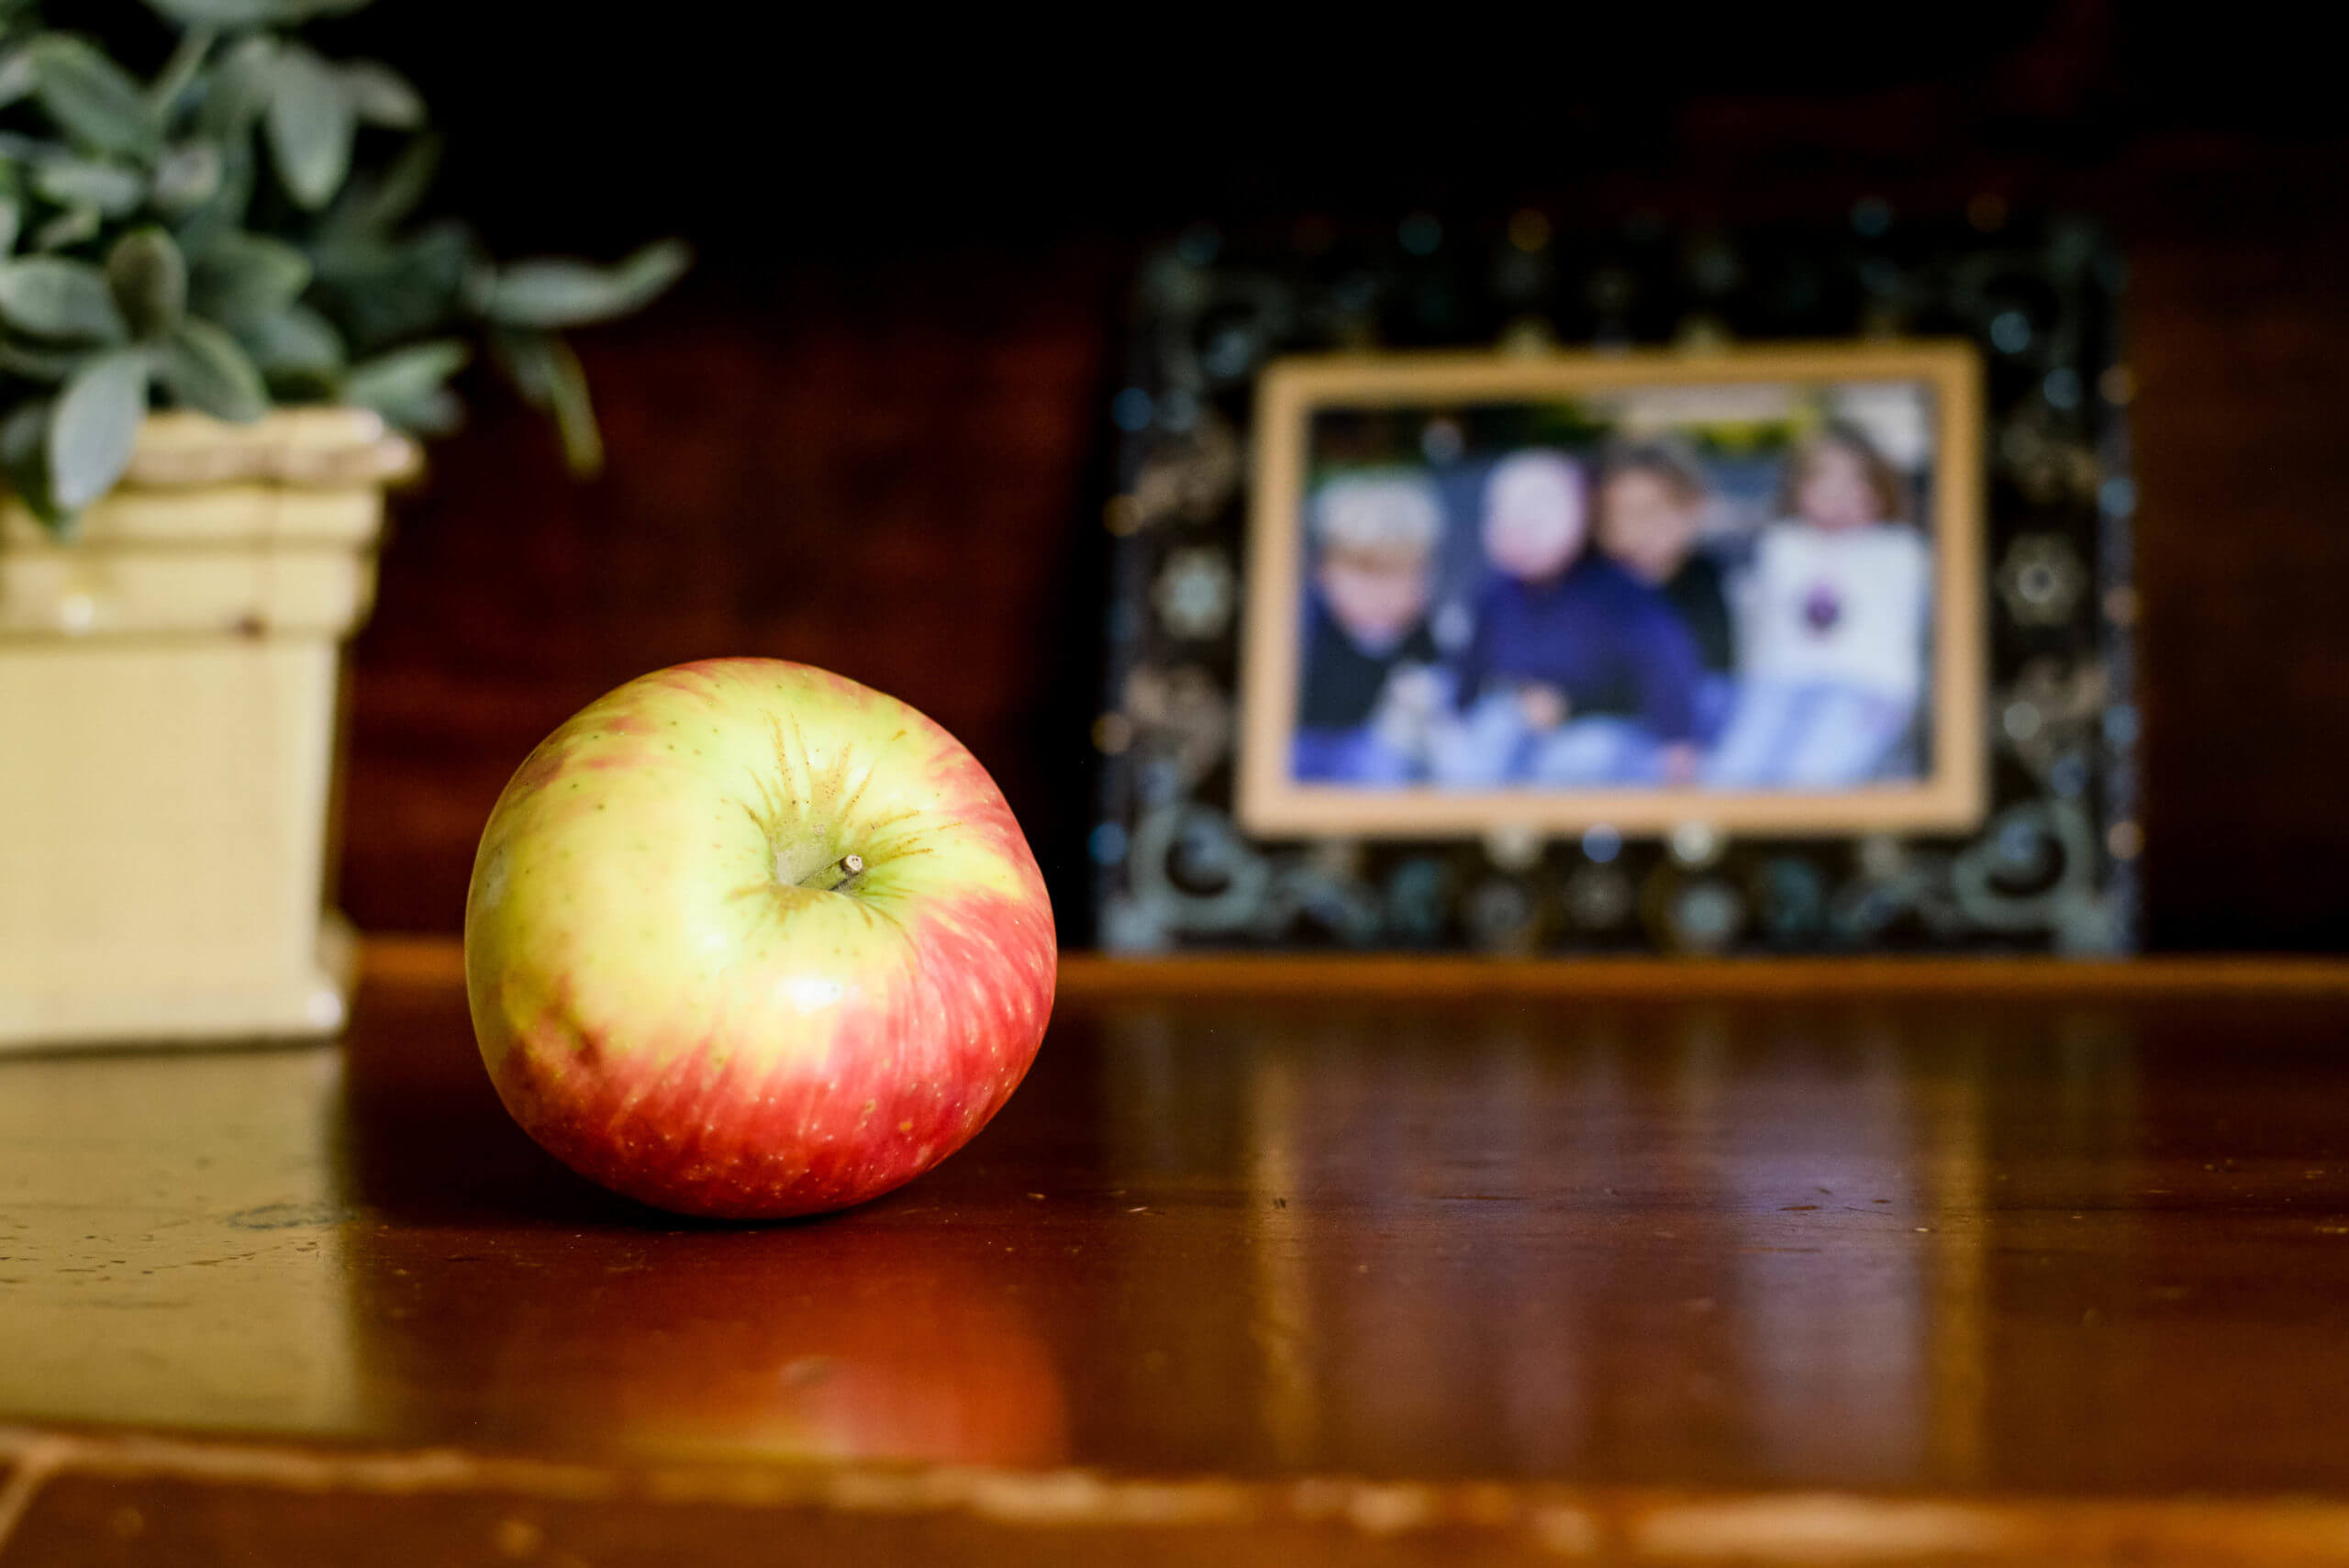 A focused view of an apple on a table. Behind the apple is an unfocused view of a framed family portrait.